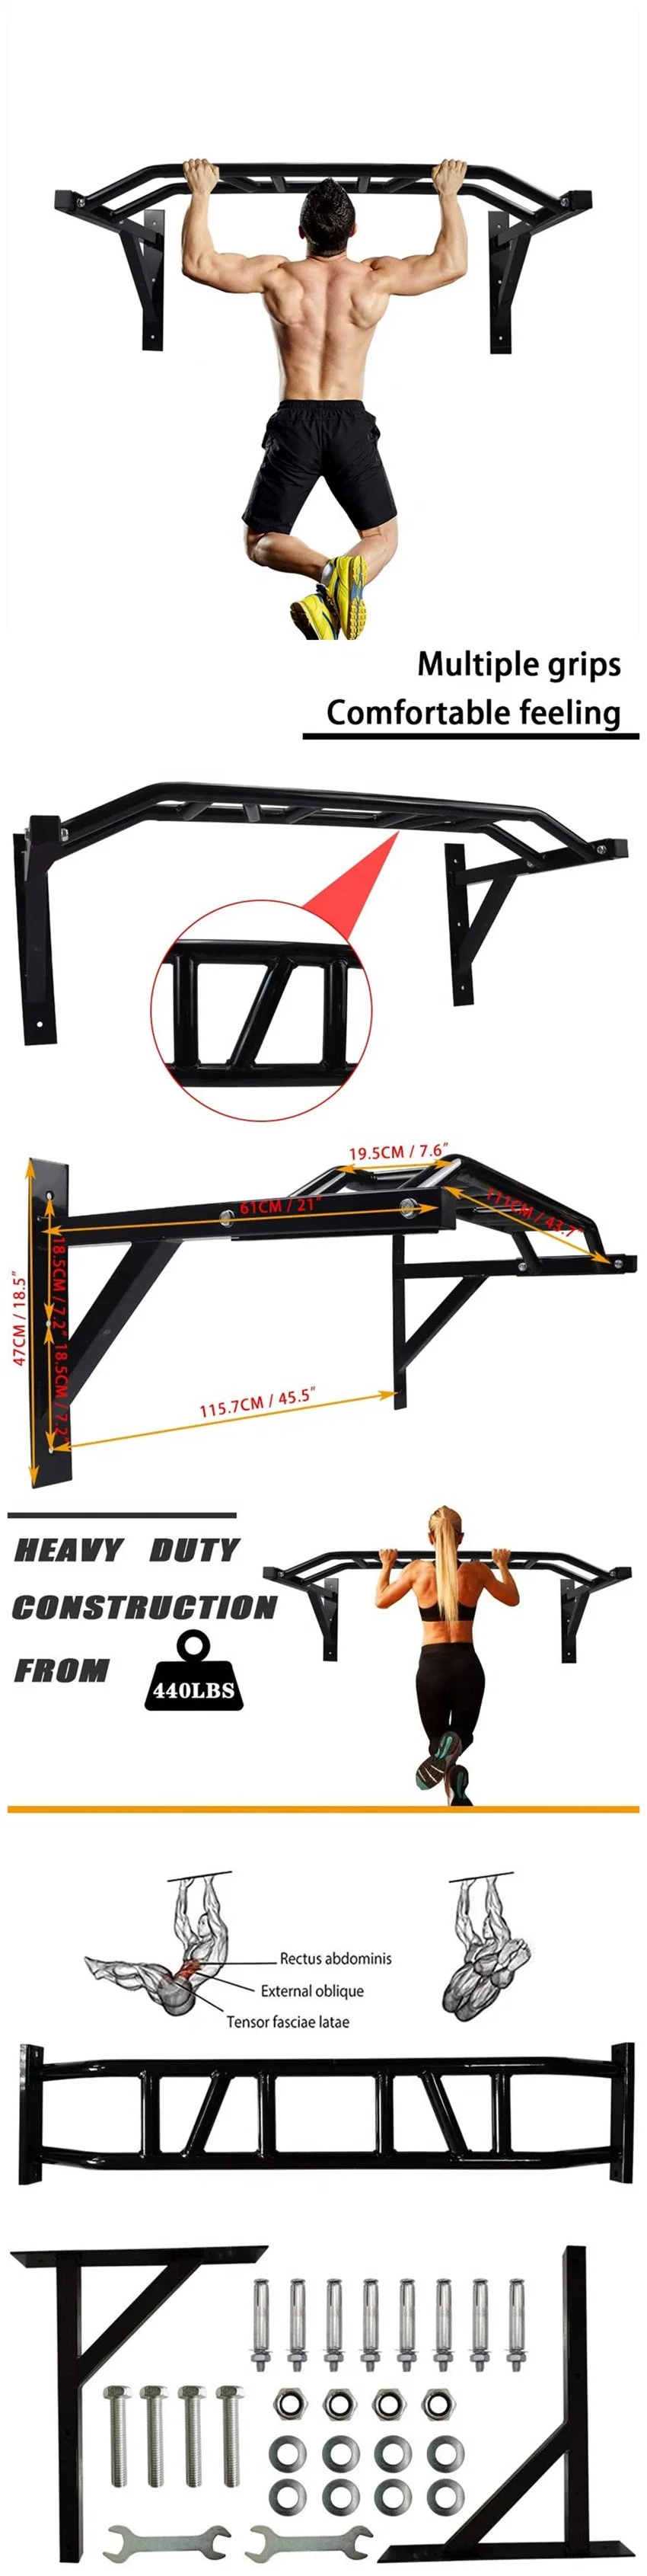 Pull up Bar Wall Mounted Chin up Bar Wall Mount Multifunctional DIP Station for Indoor Home Gym Workout Power Tower Set Training